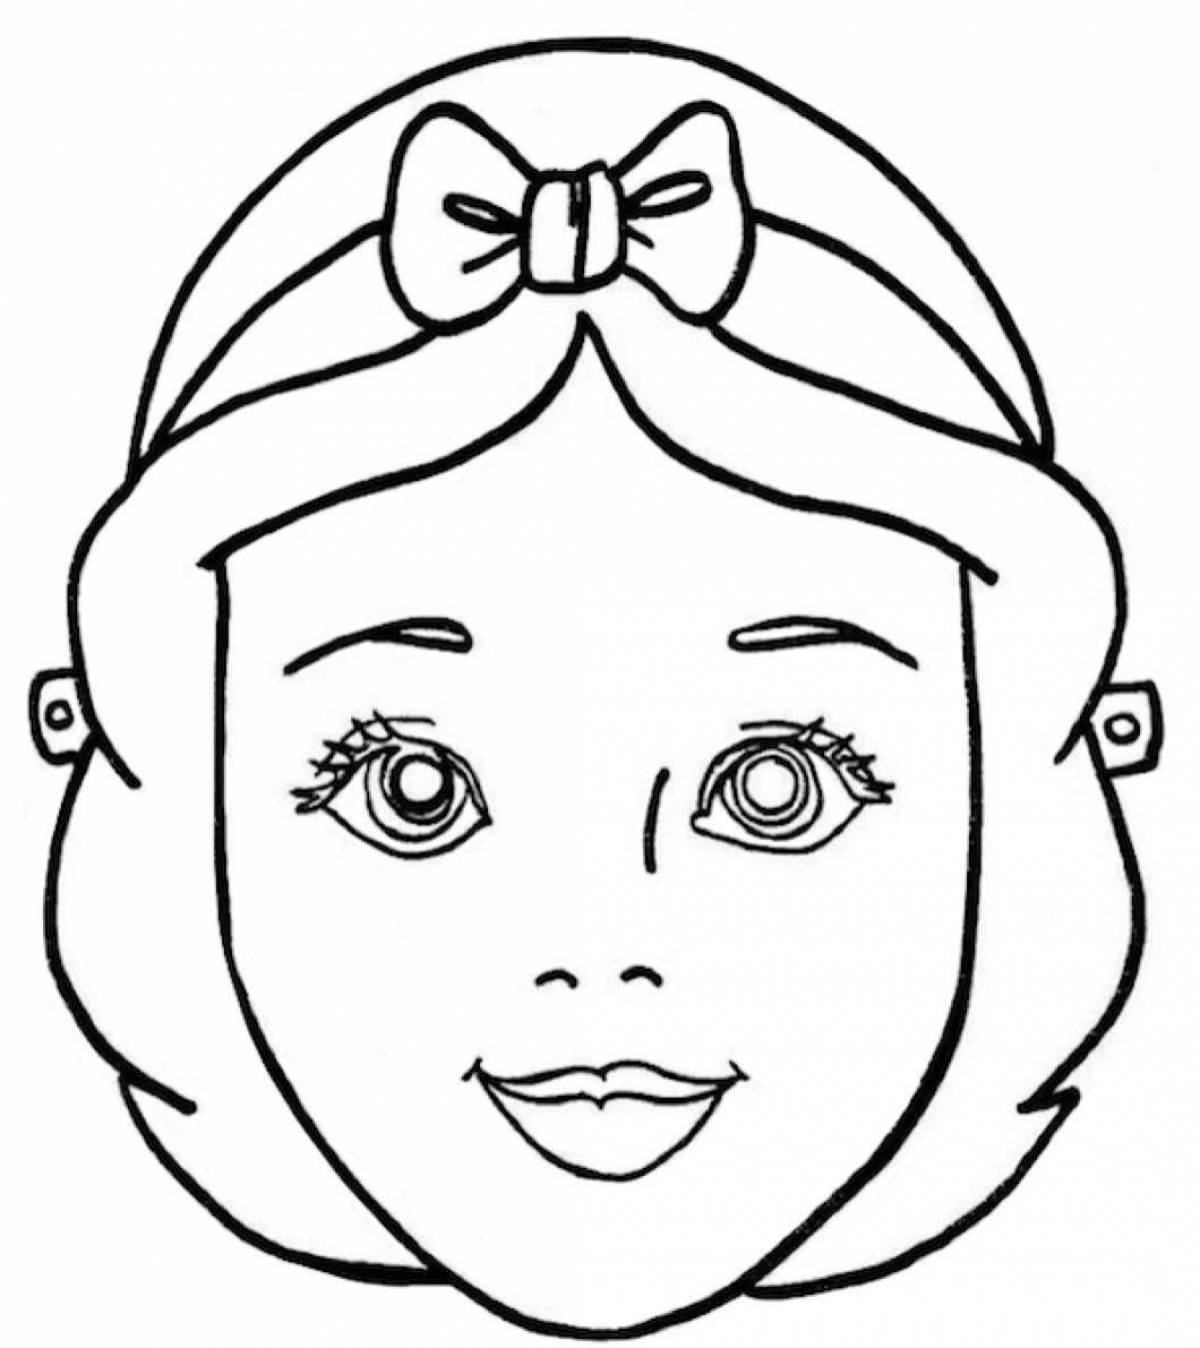 Creative human face coloring page